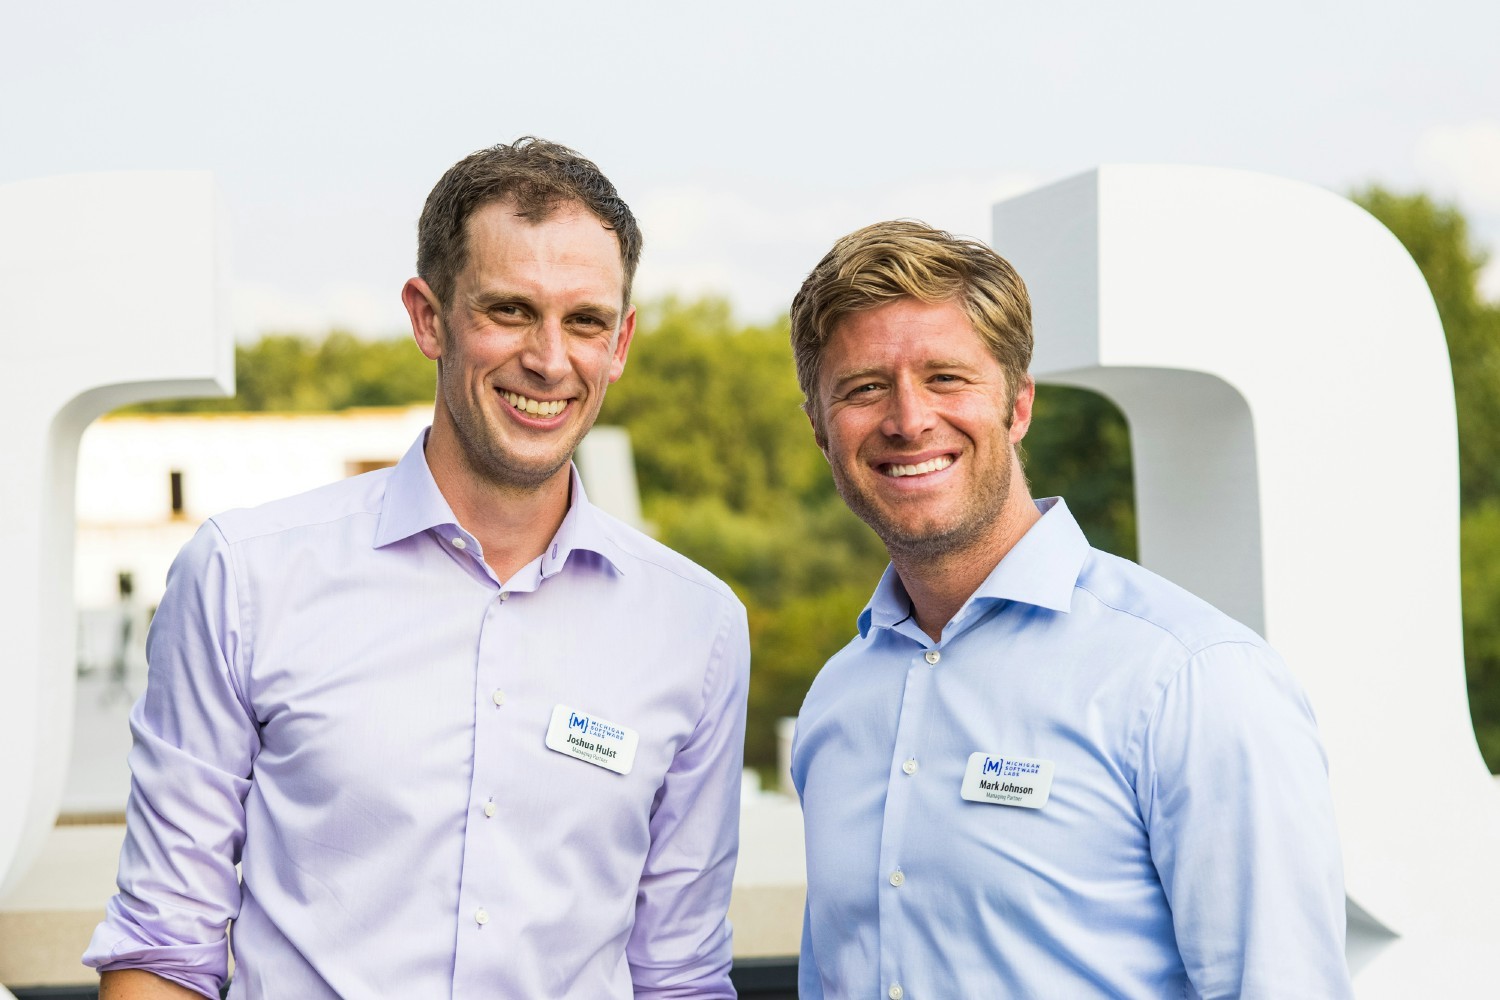 Joshua Hulst (left) and Mark Johnson (right) co-founded Michigan Software Labs in 2010 and together manage the company.